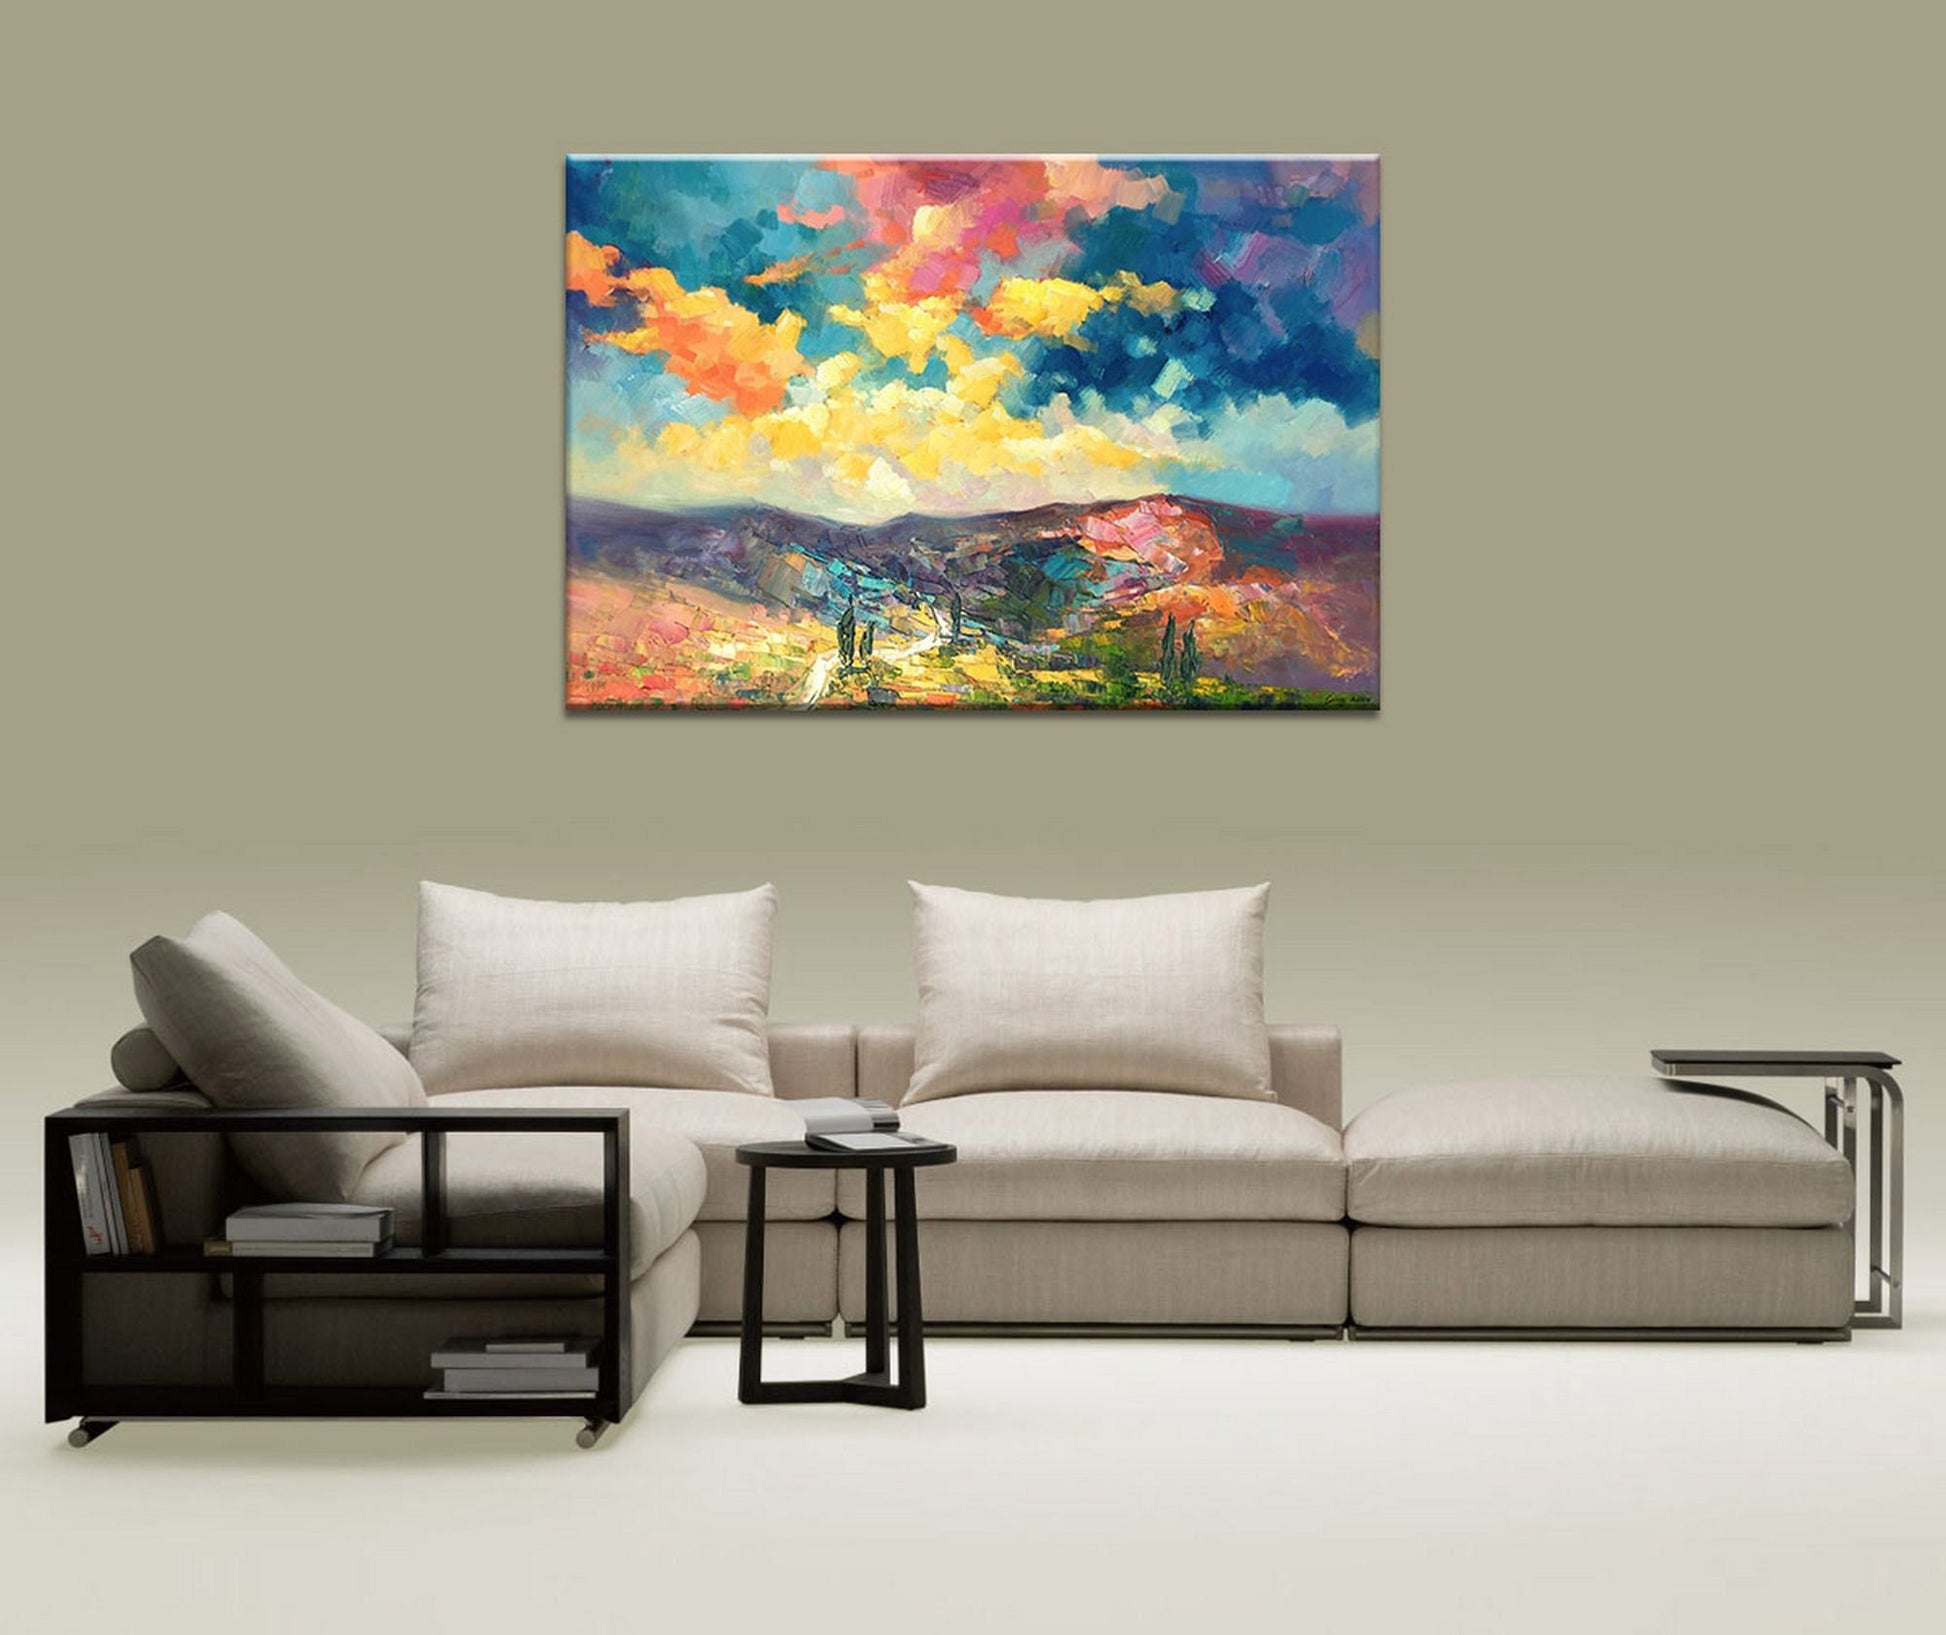 Large Landscape Painting, Original Oil Painting, Wall Decor, Painting Abstract, Living Room Decor, Large Canvas Painting, Canvas Art